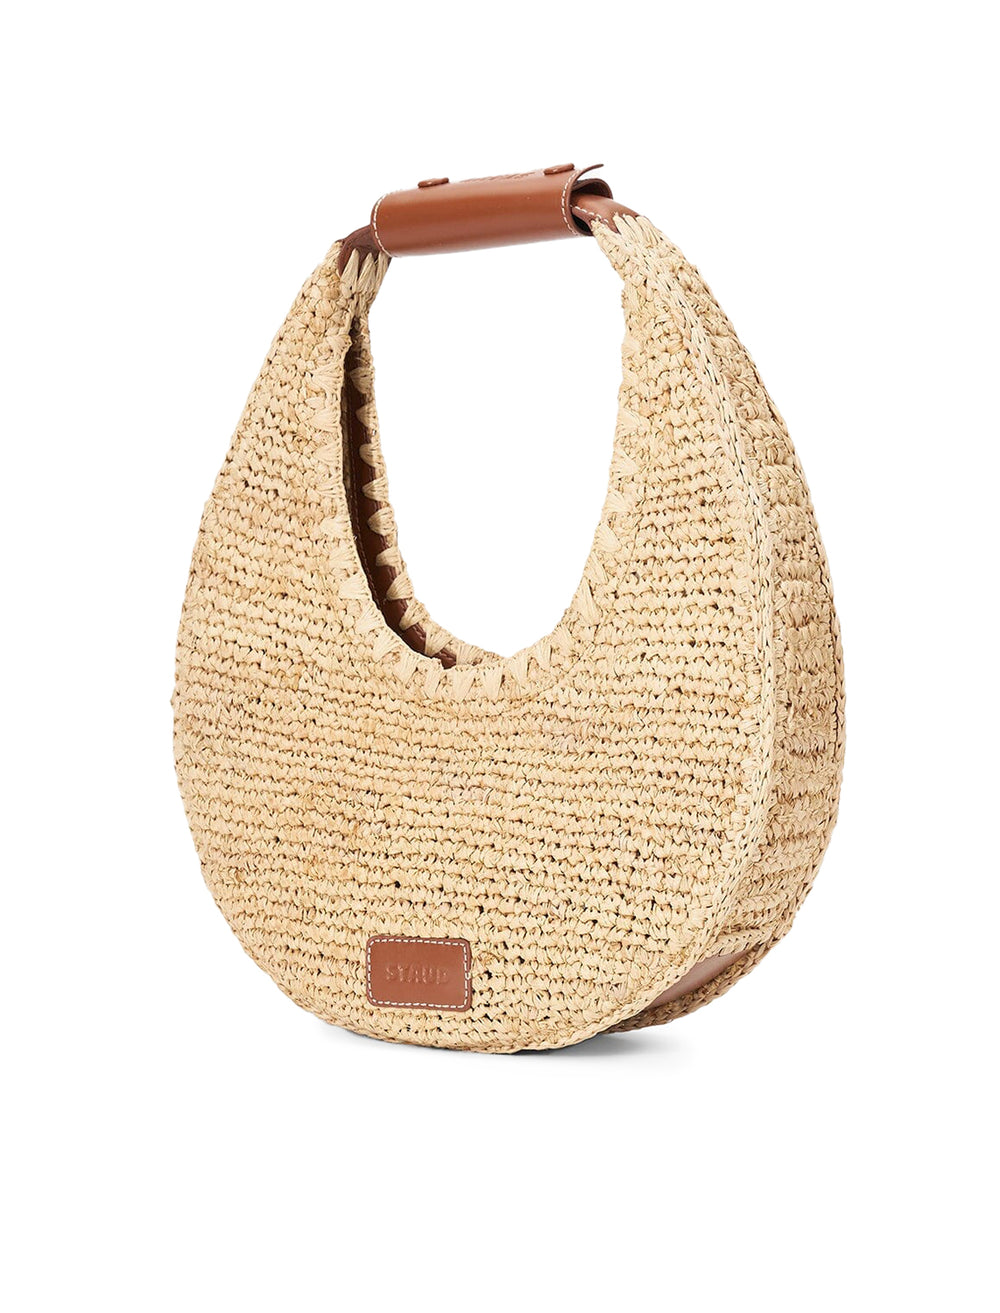 Back angle view of STAUD's moon raffia tote bag in natural.